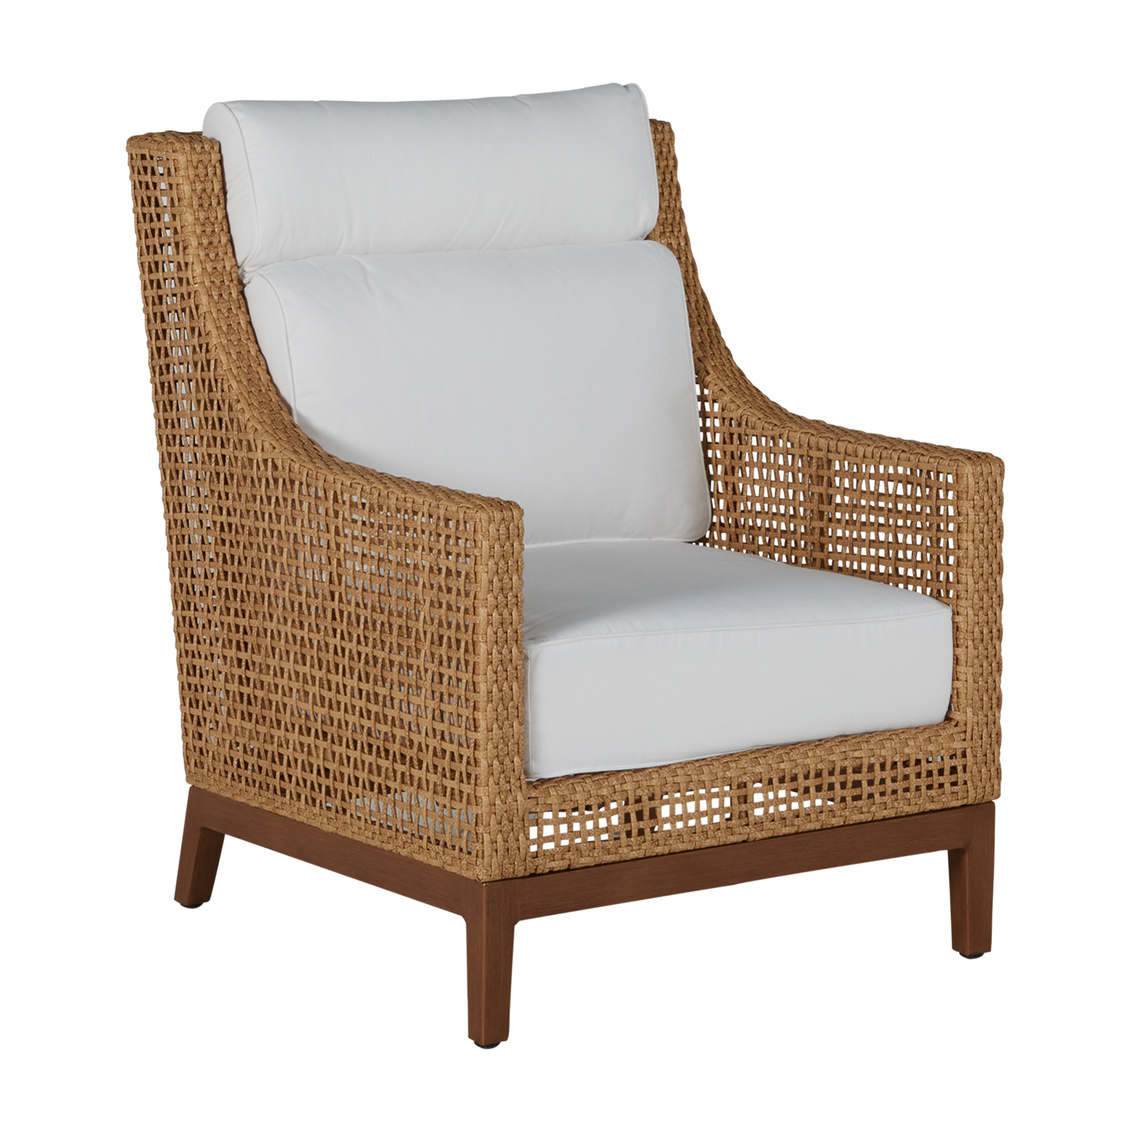 peninsula lounge chair in light raffia/natural sandalwood – frame only product image